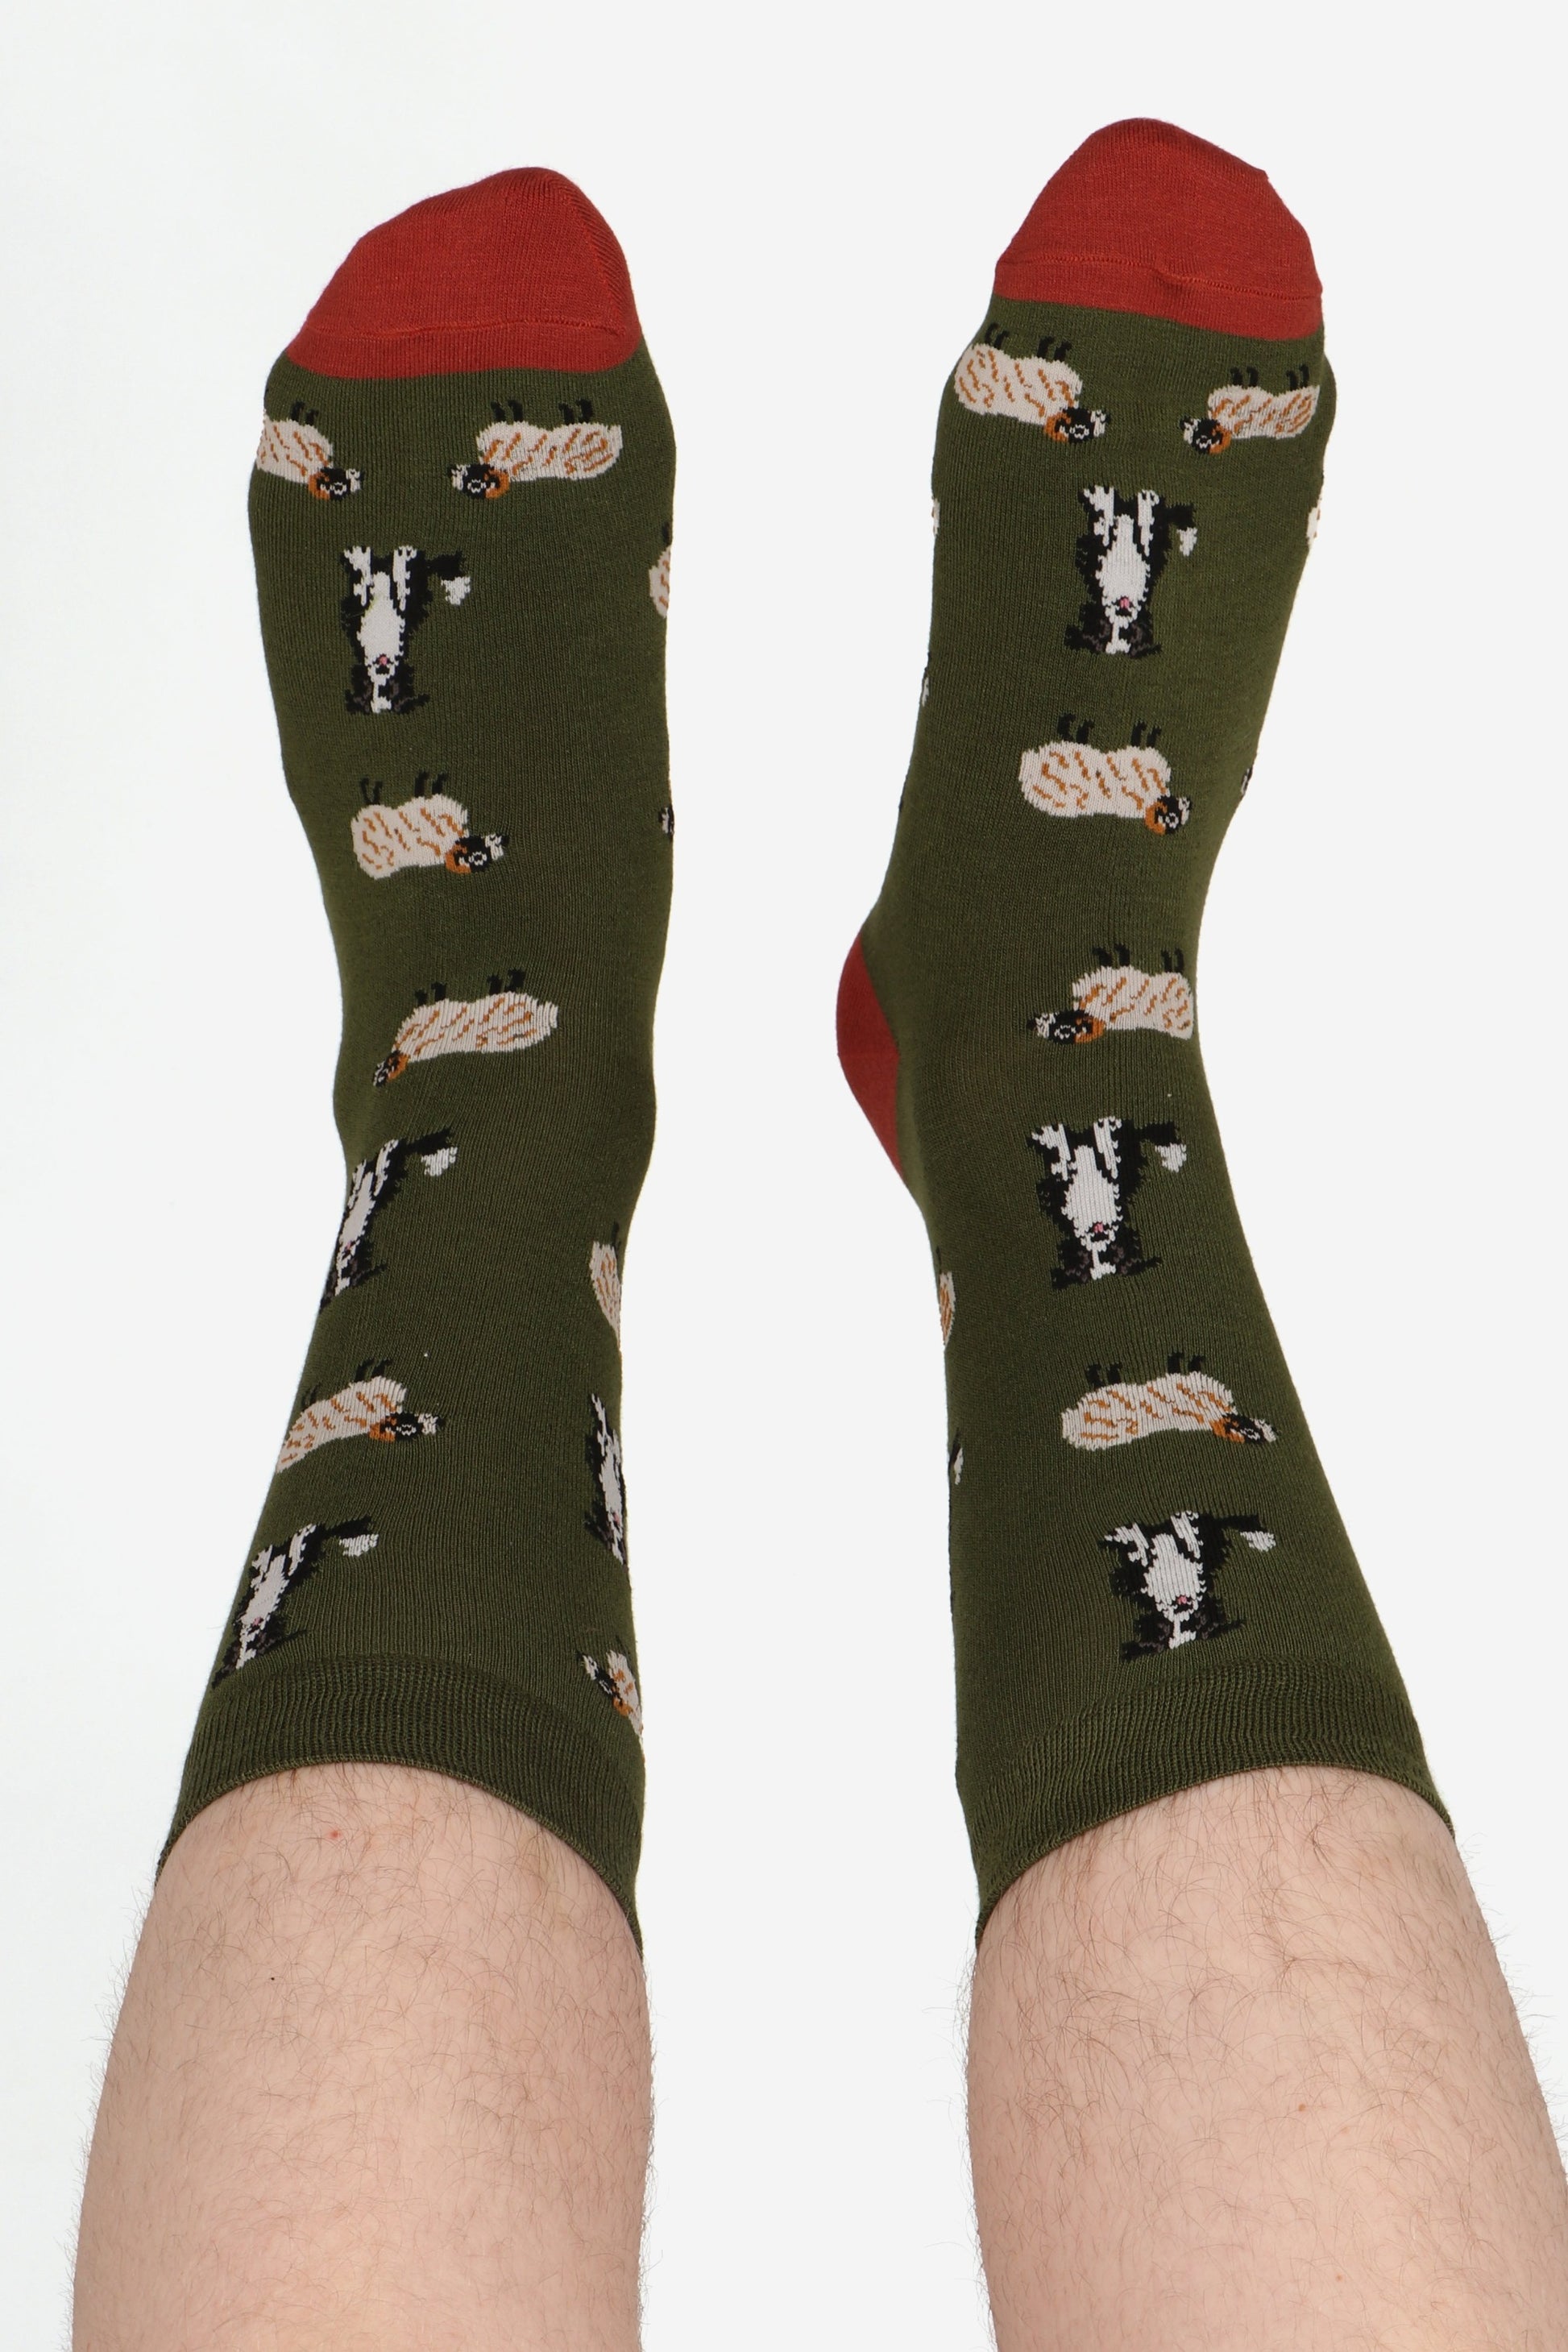 Men's feet wearing green border collie and sheep print bamboo socks. Feet are in the air. Constrasting toe detail in terracotta orange can be seen